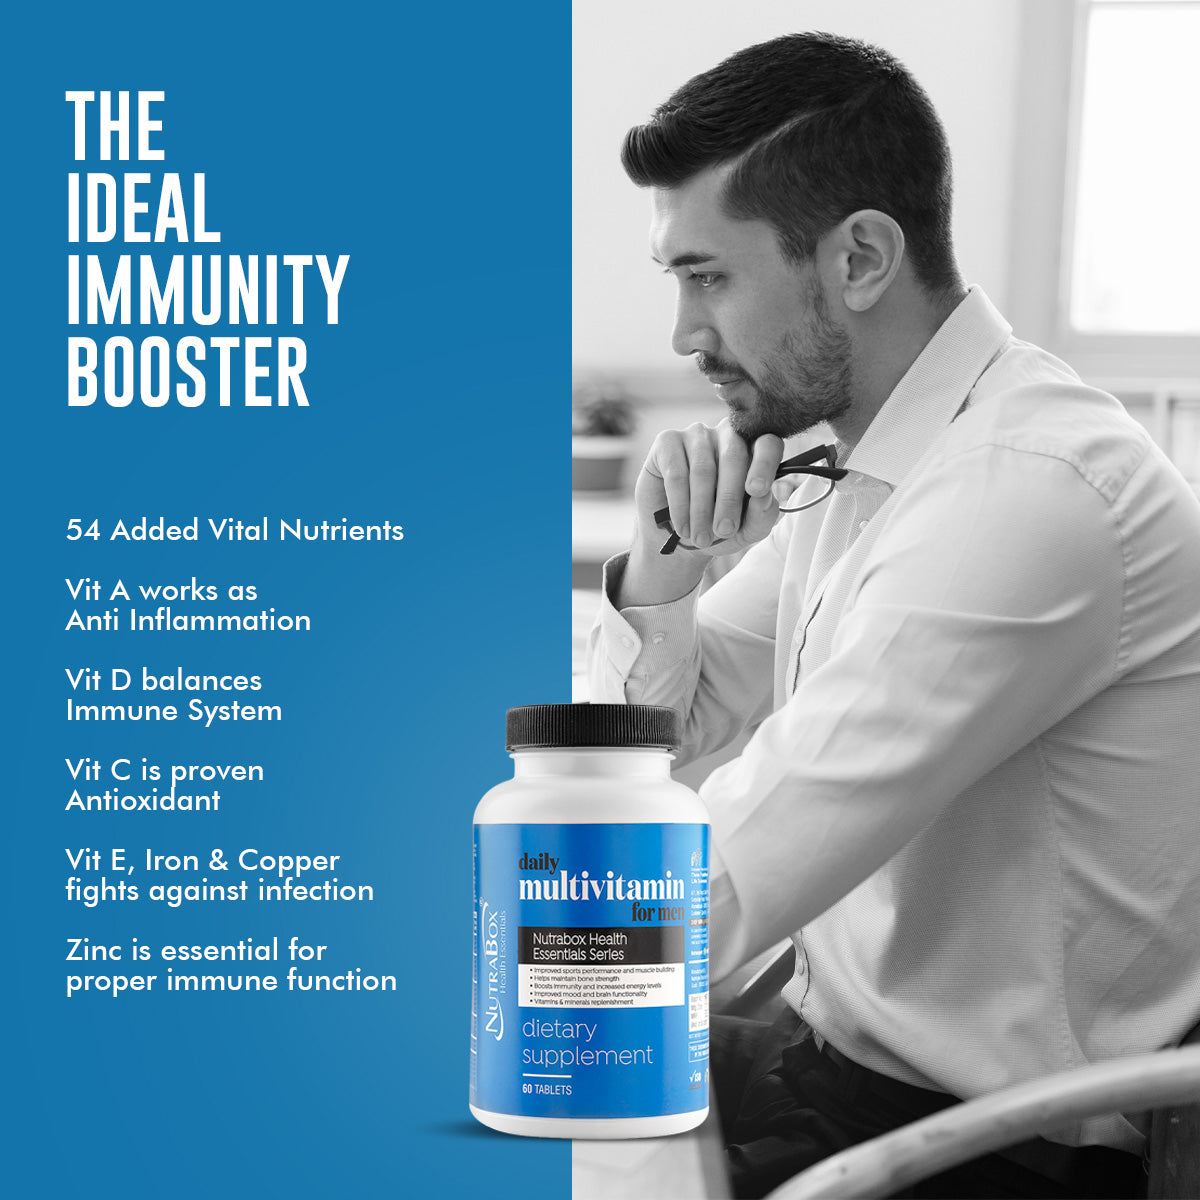 The ideal immunity booster for Men